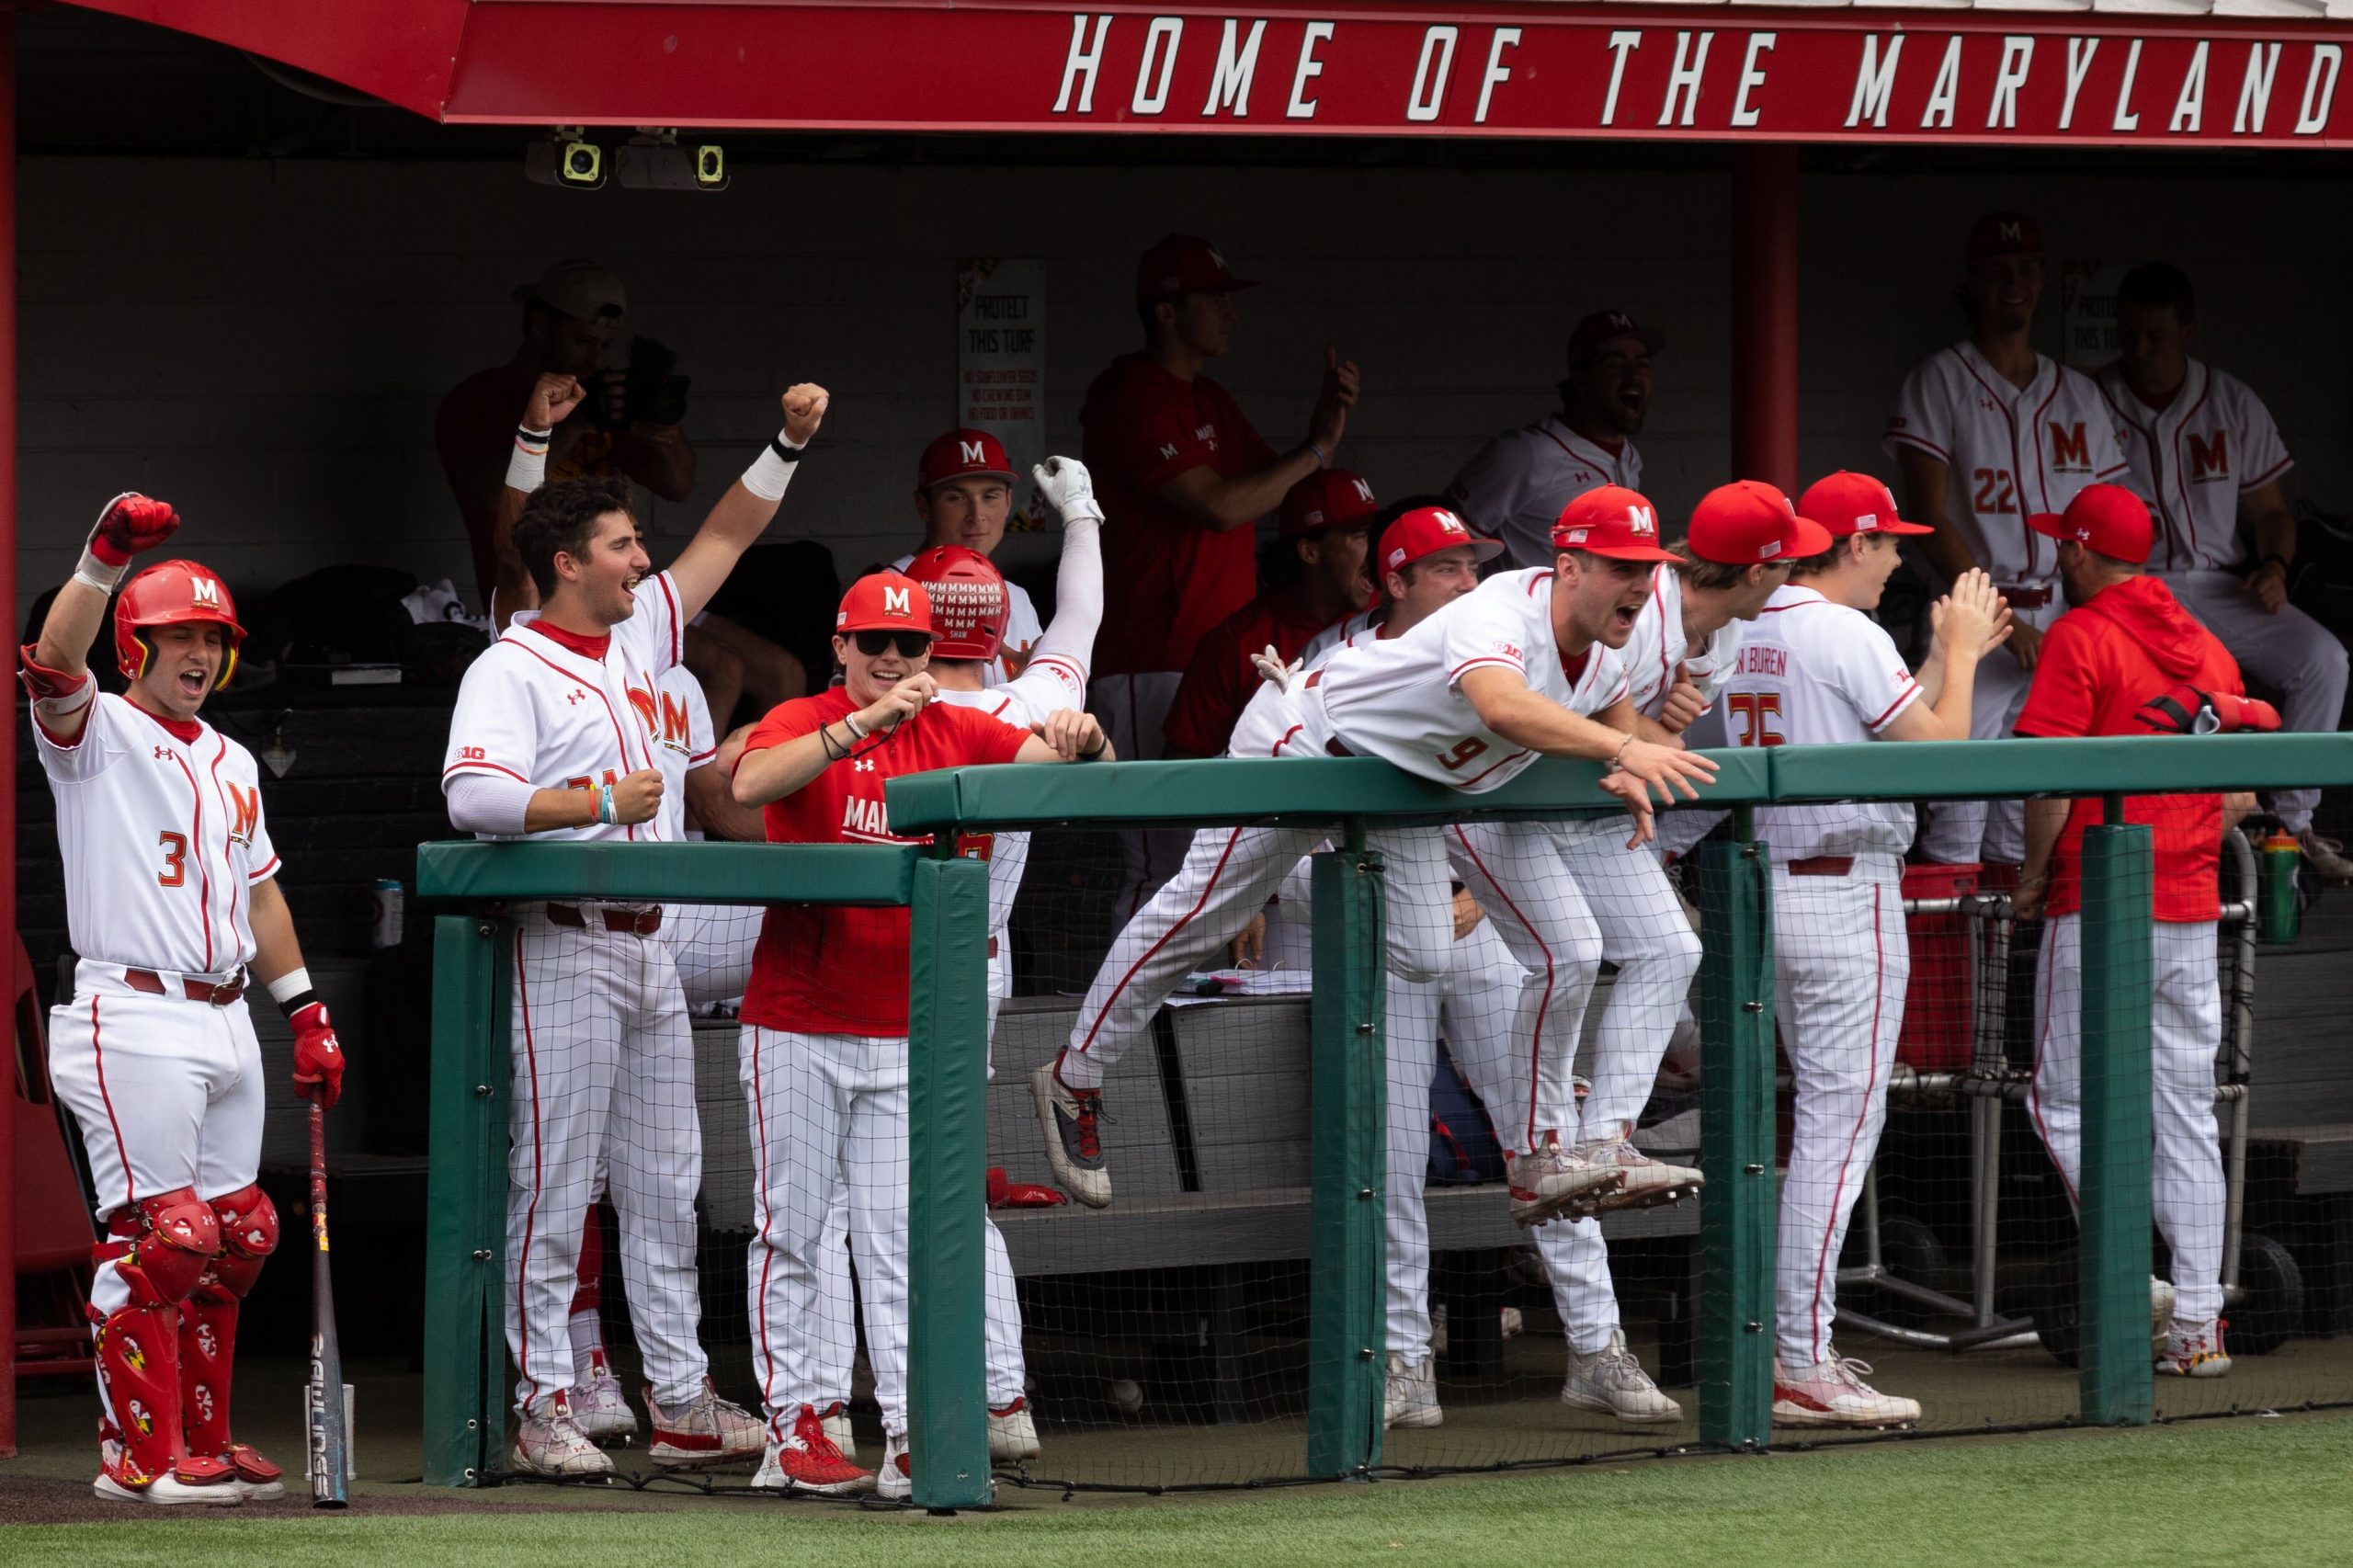 Champs: Maryland baseball beats Iowa, 4-0, to win program’s first Large Ten event crown